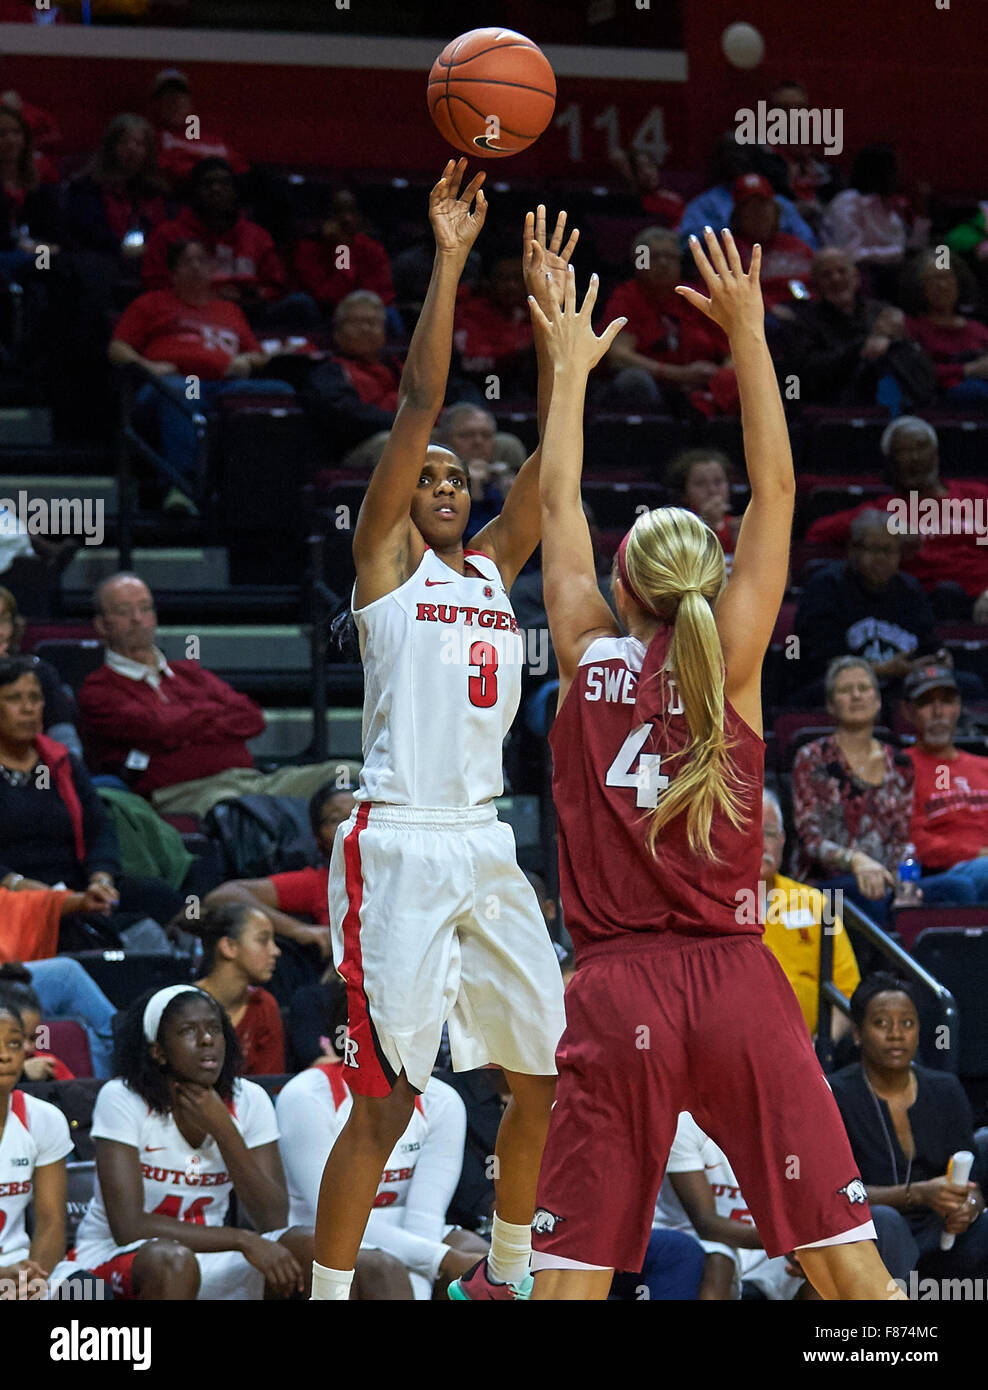 Piscataway, New Jersey, USA. 6th Dec, 2015. Rutgers guard Tyler Scaife (3) shoots over Arkansas guard/forward Keiryn Swenson (4) finished with 24 points during NCAA basketball action between the Arkansas Razorbacks and the Rutgers Scarlet Knights at Rutgers Athletic Center in Piscataway, New Jersey. Rutgers defeated Arkansas 60-40. Duncan Williams/CSM/Alamy Live News Stock Photo